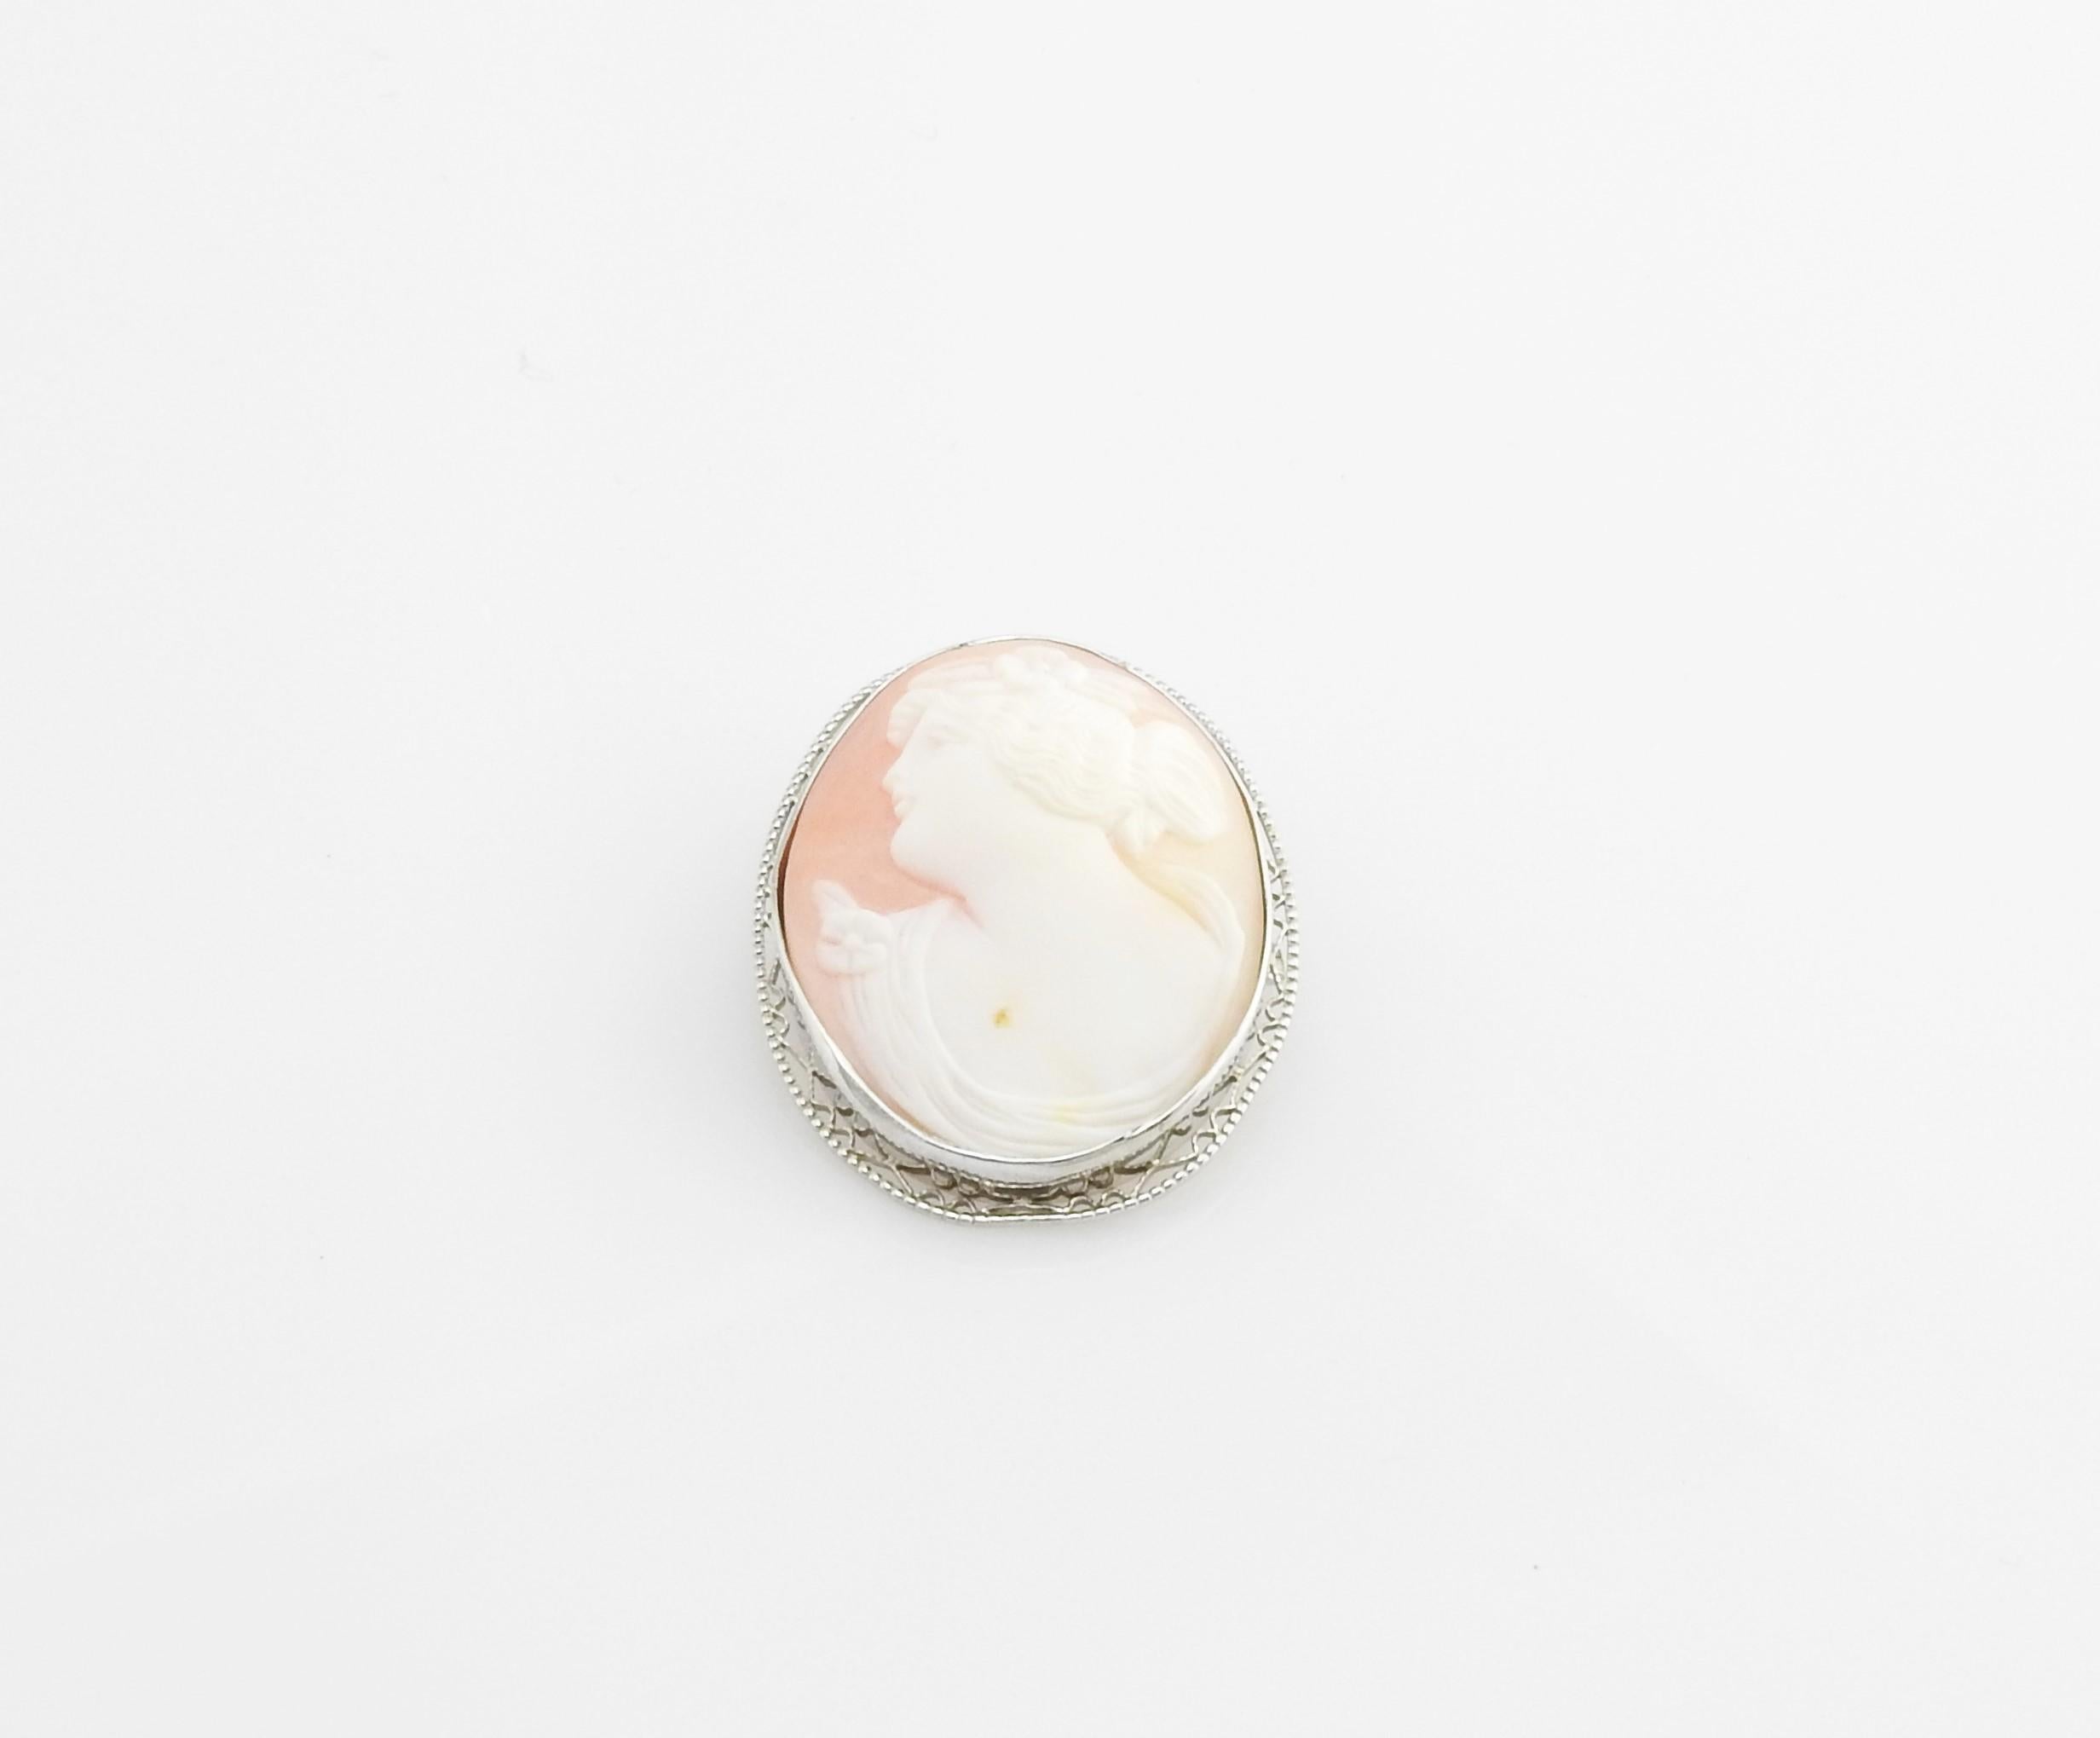 10 Karat White Gold Cameo Brooch / Pin For Sale 2